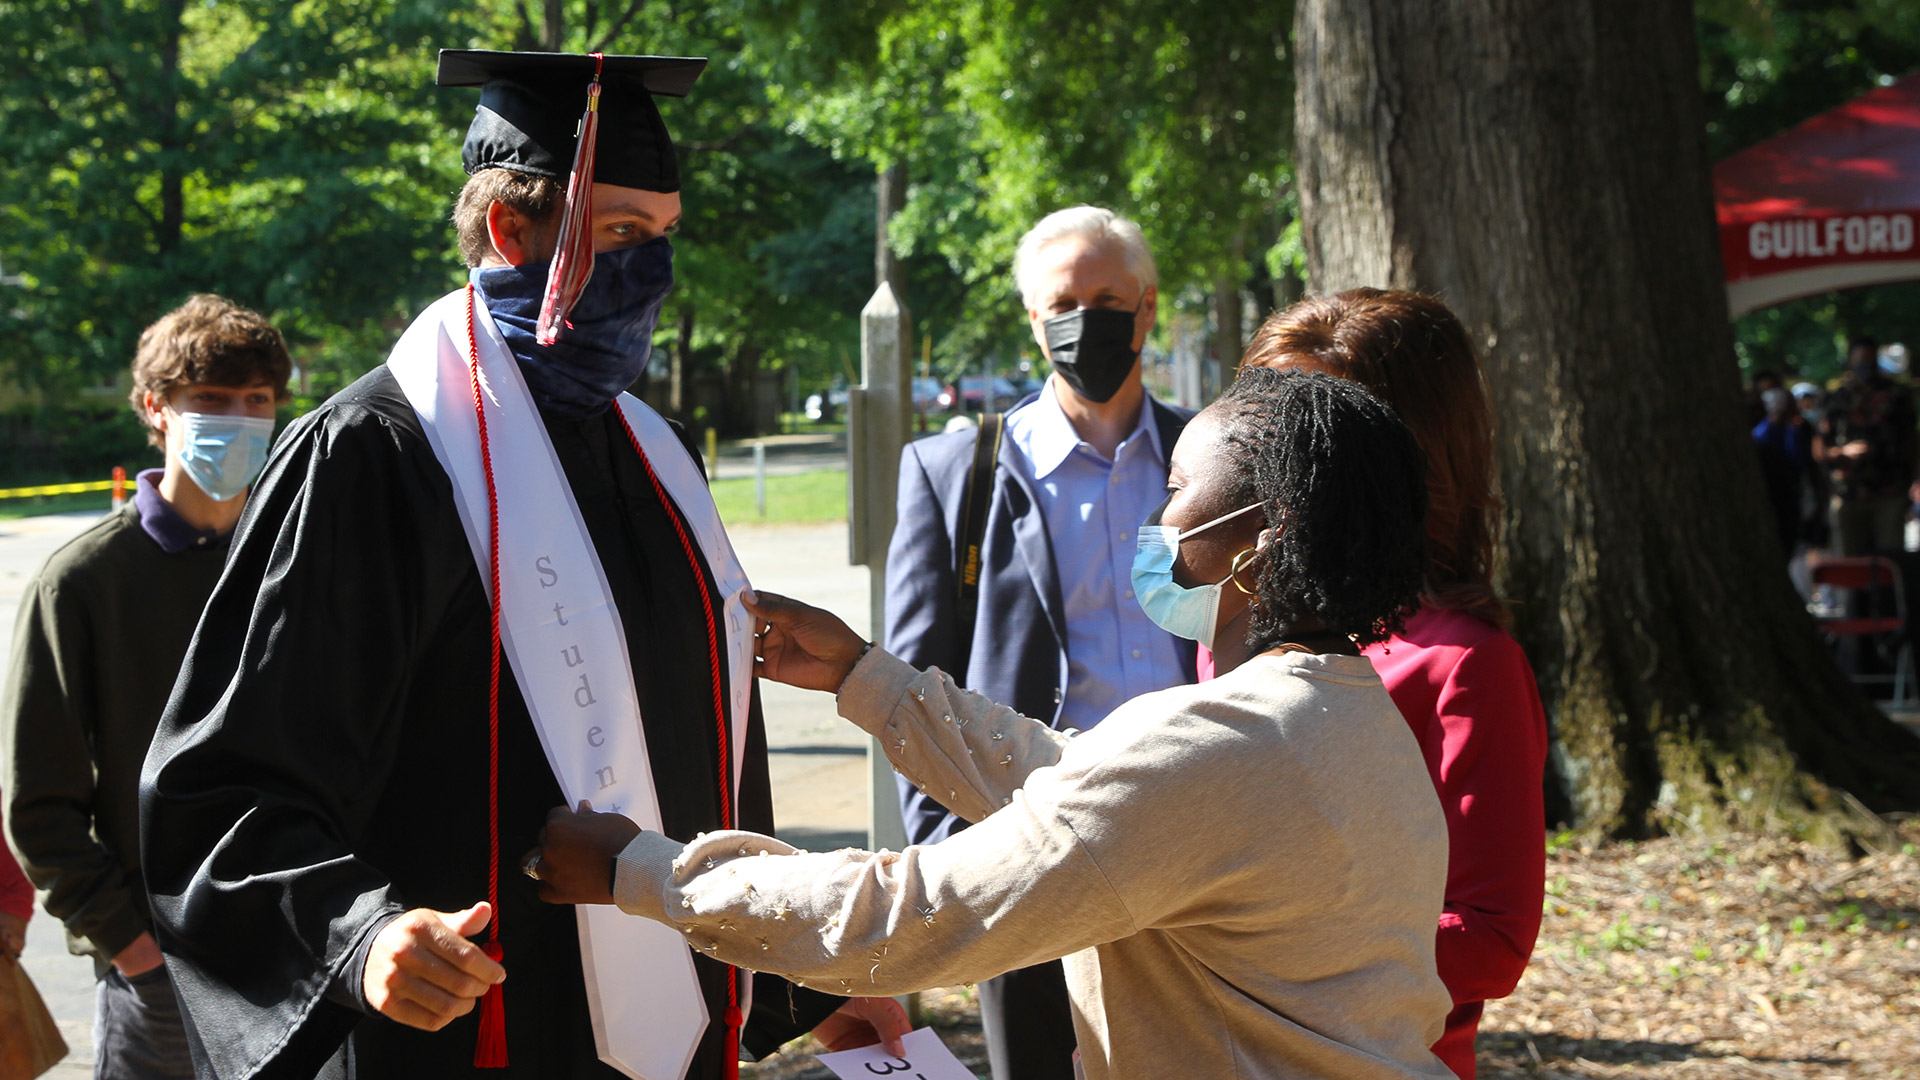 A friend gives a graduate a few final touches before taking the stage for Commencement 2021.